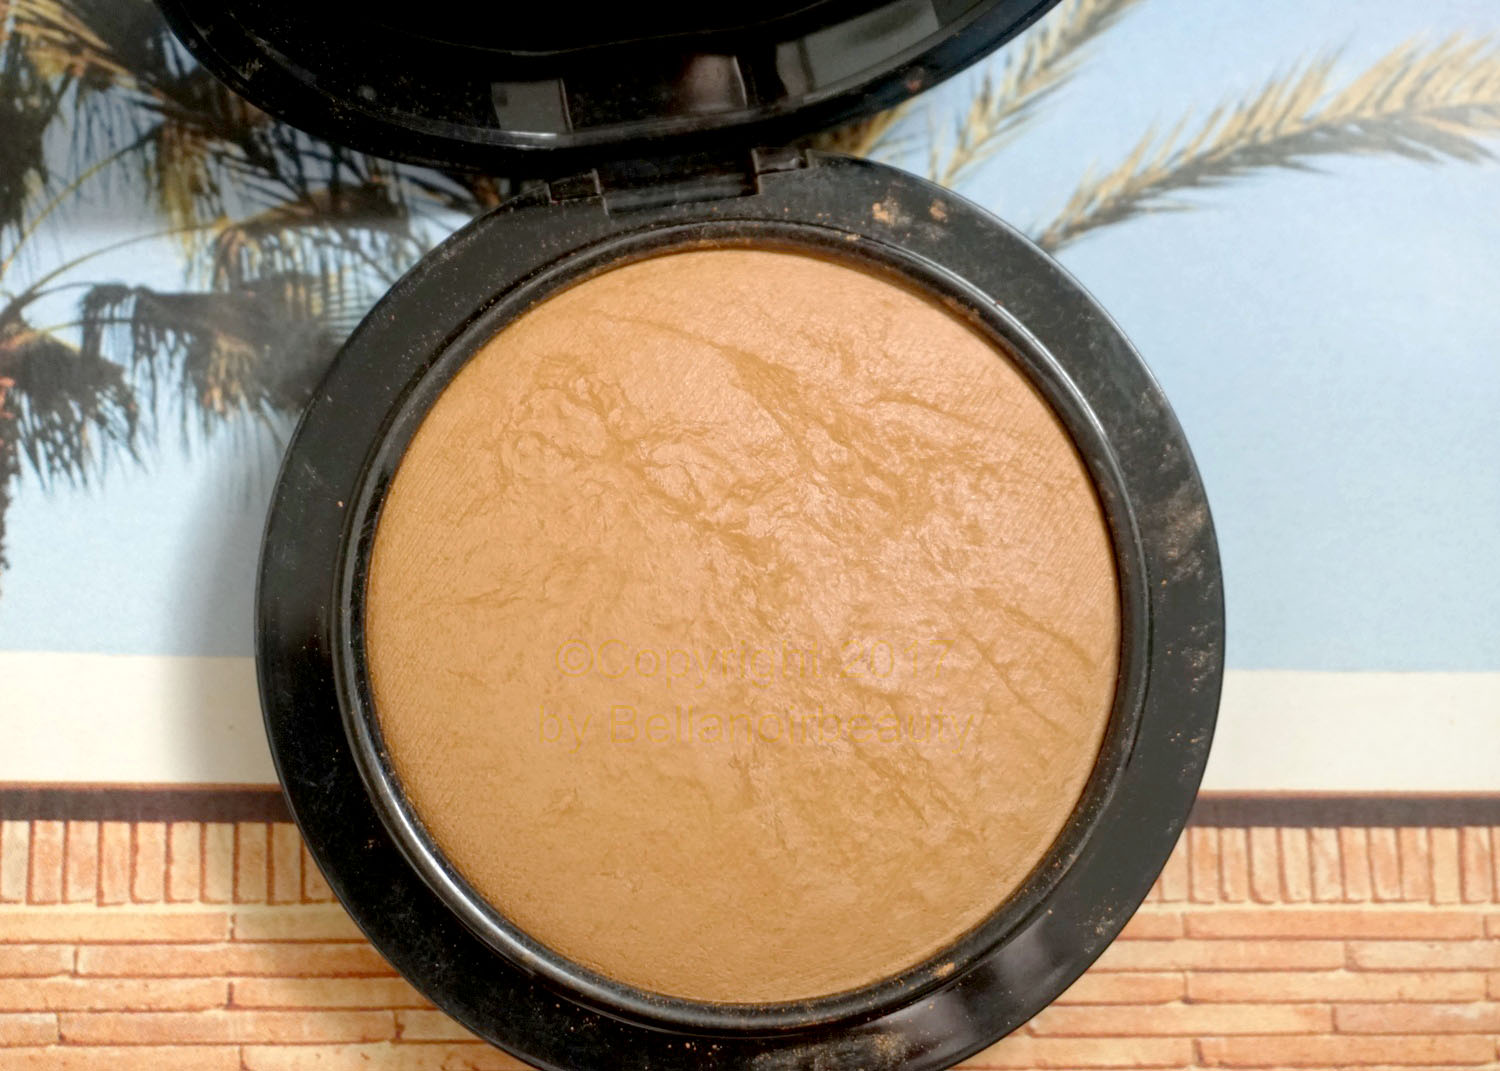 Summertime Foundation Review: MAC Mineralize SkinFinish Natural Powder | BELLA BEAUTY